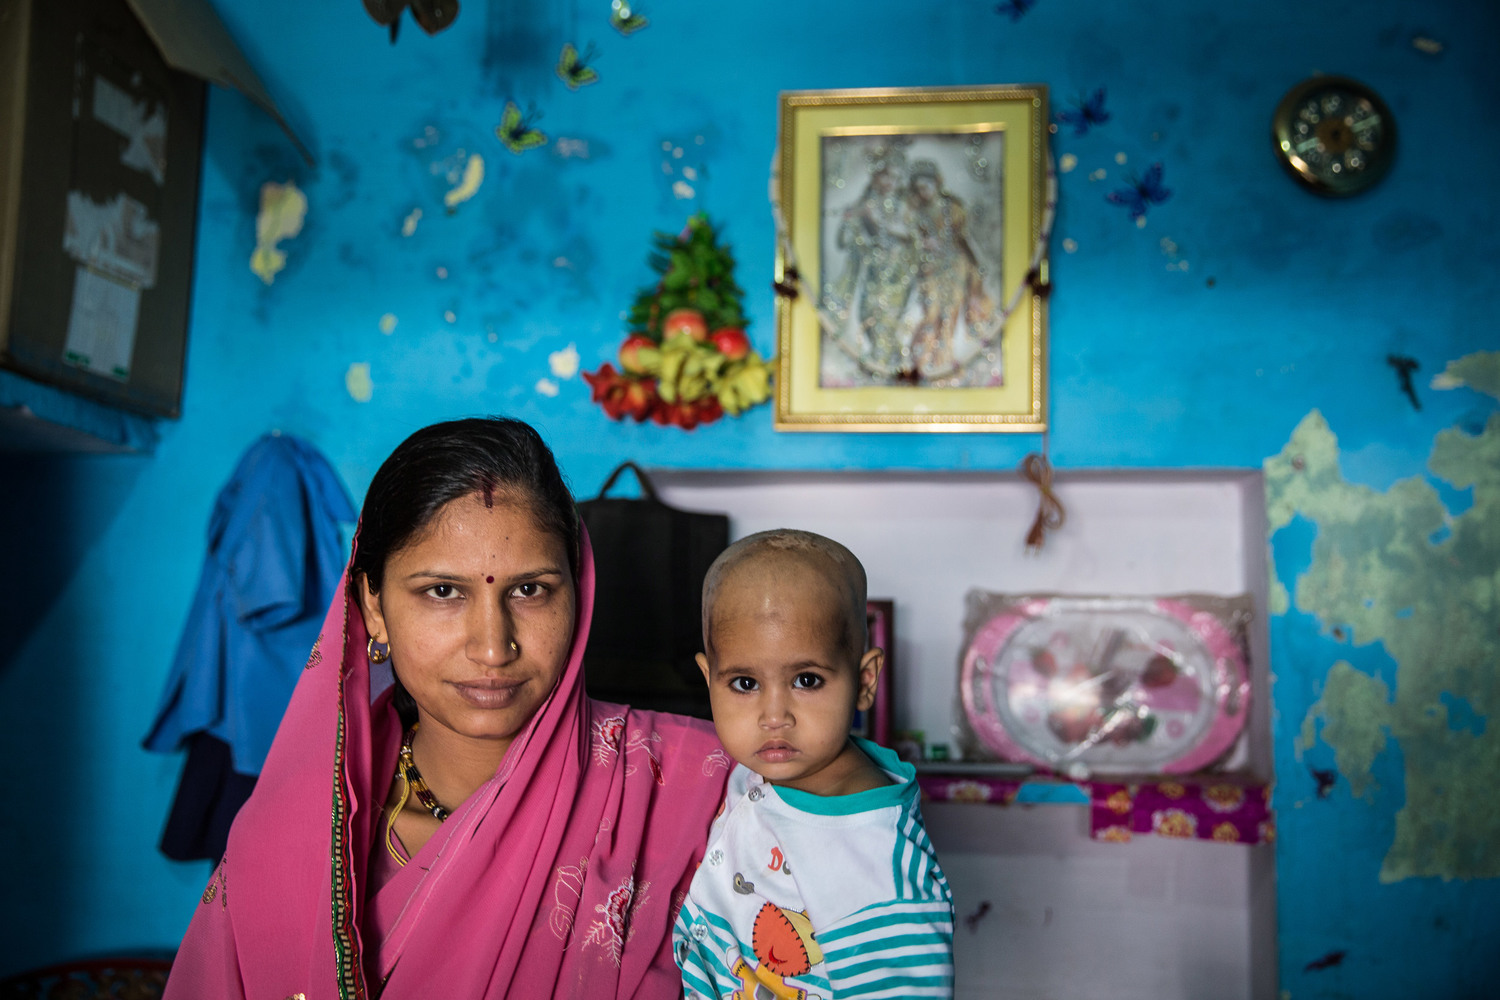  Shushila Meena, 26, stands in her home with one of her three children. Her husband is a tuk tuk driver. 